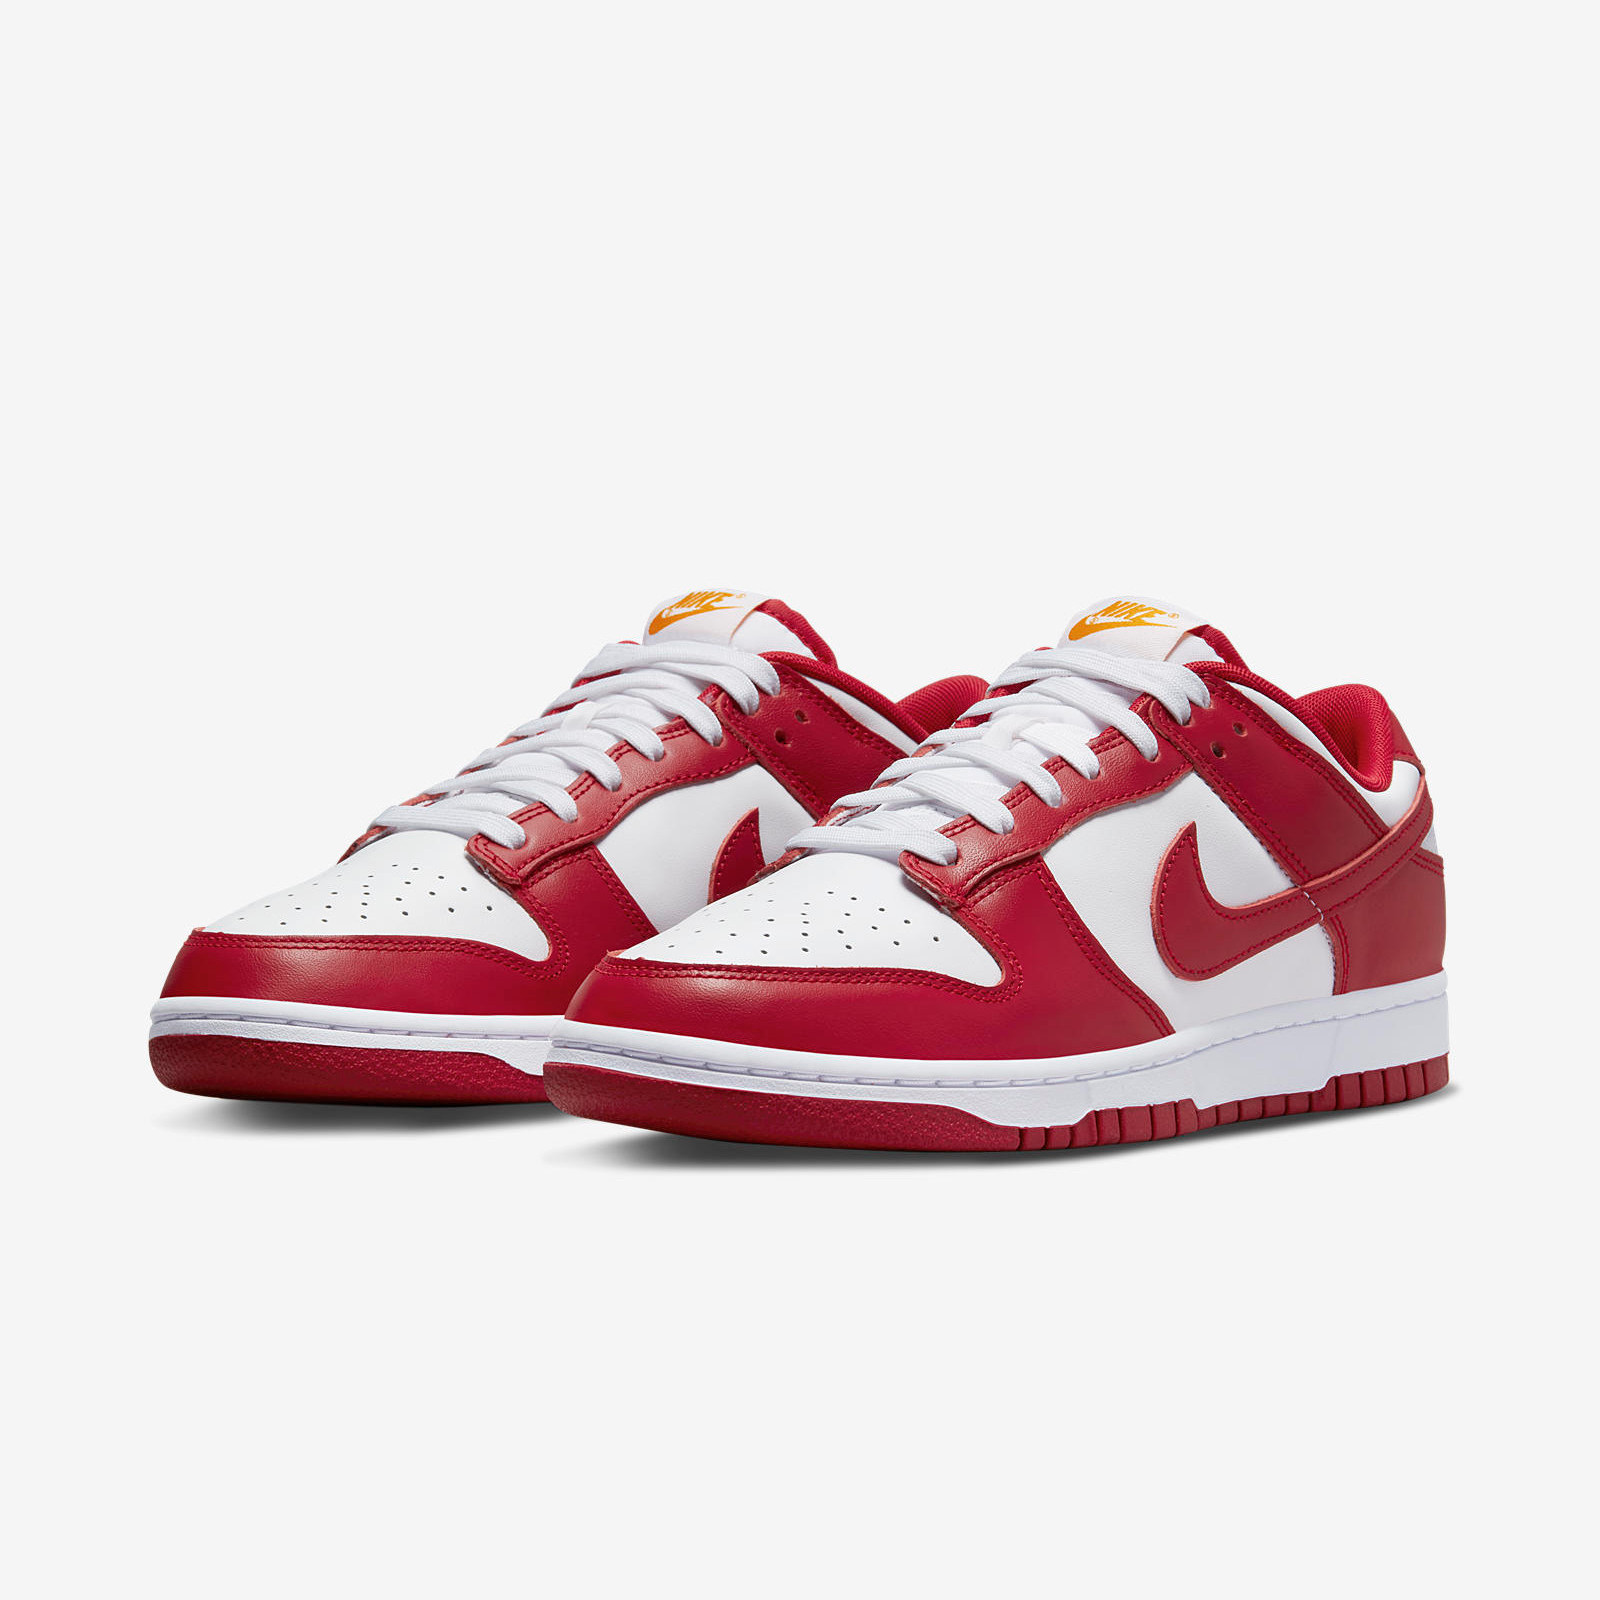 Nike Dunk Low
« Gym Red »